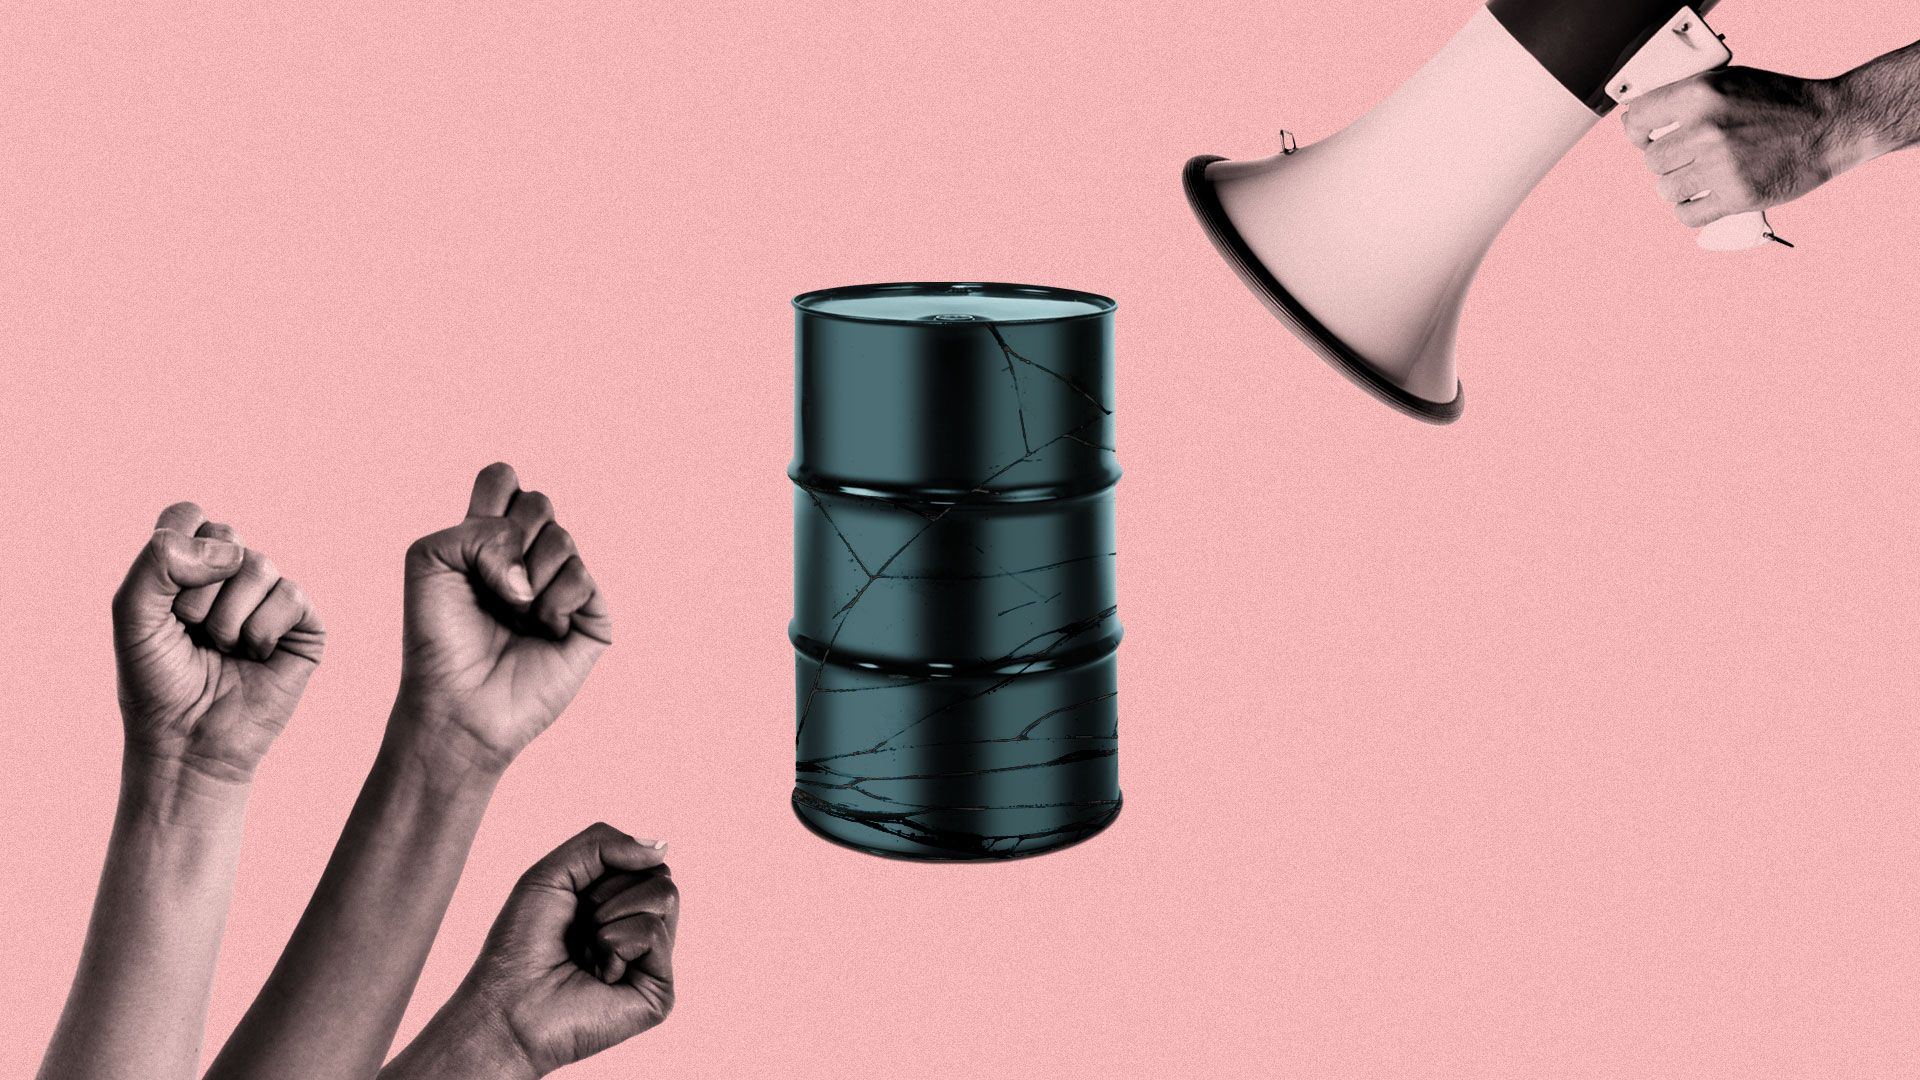 Illustration of cracking barrel with fists and megaphone.